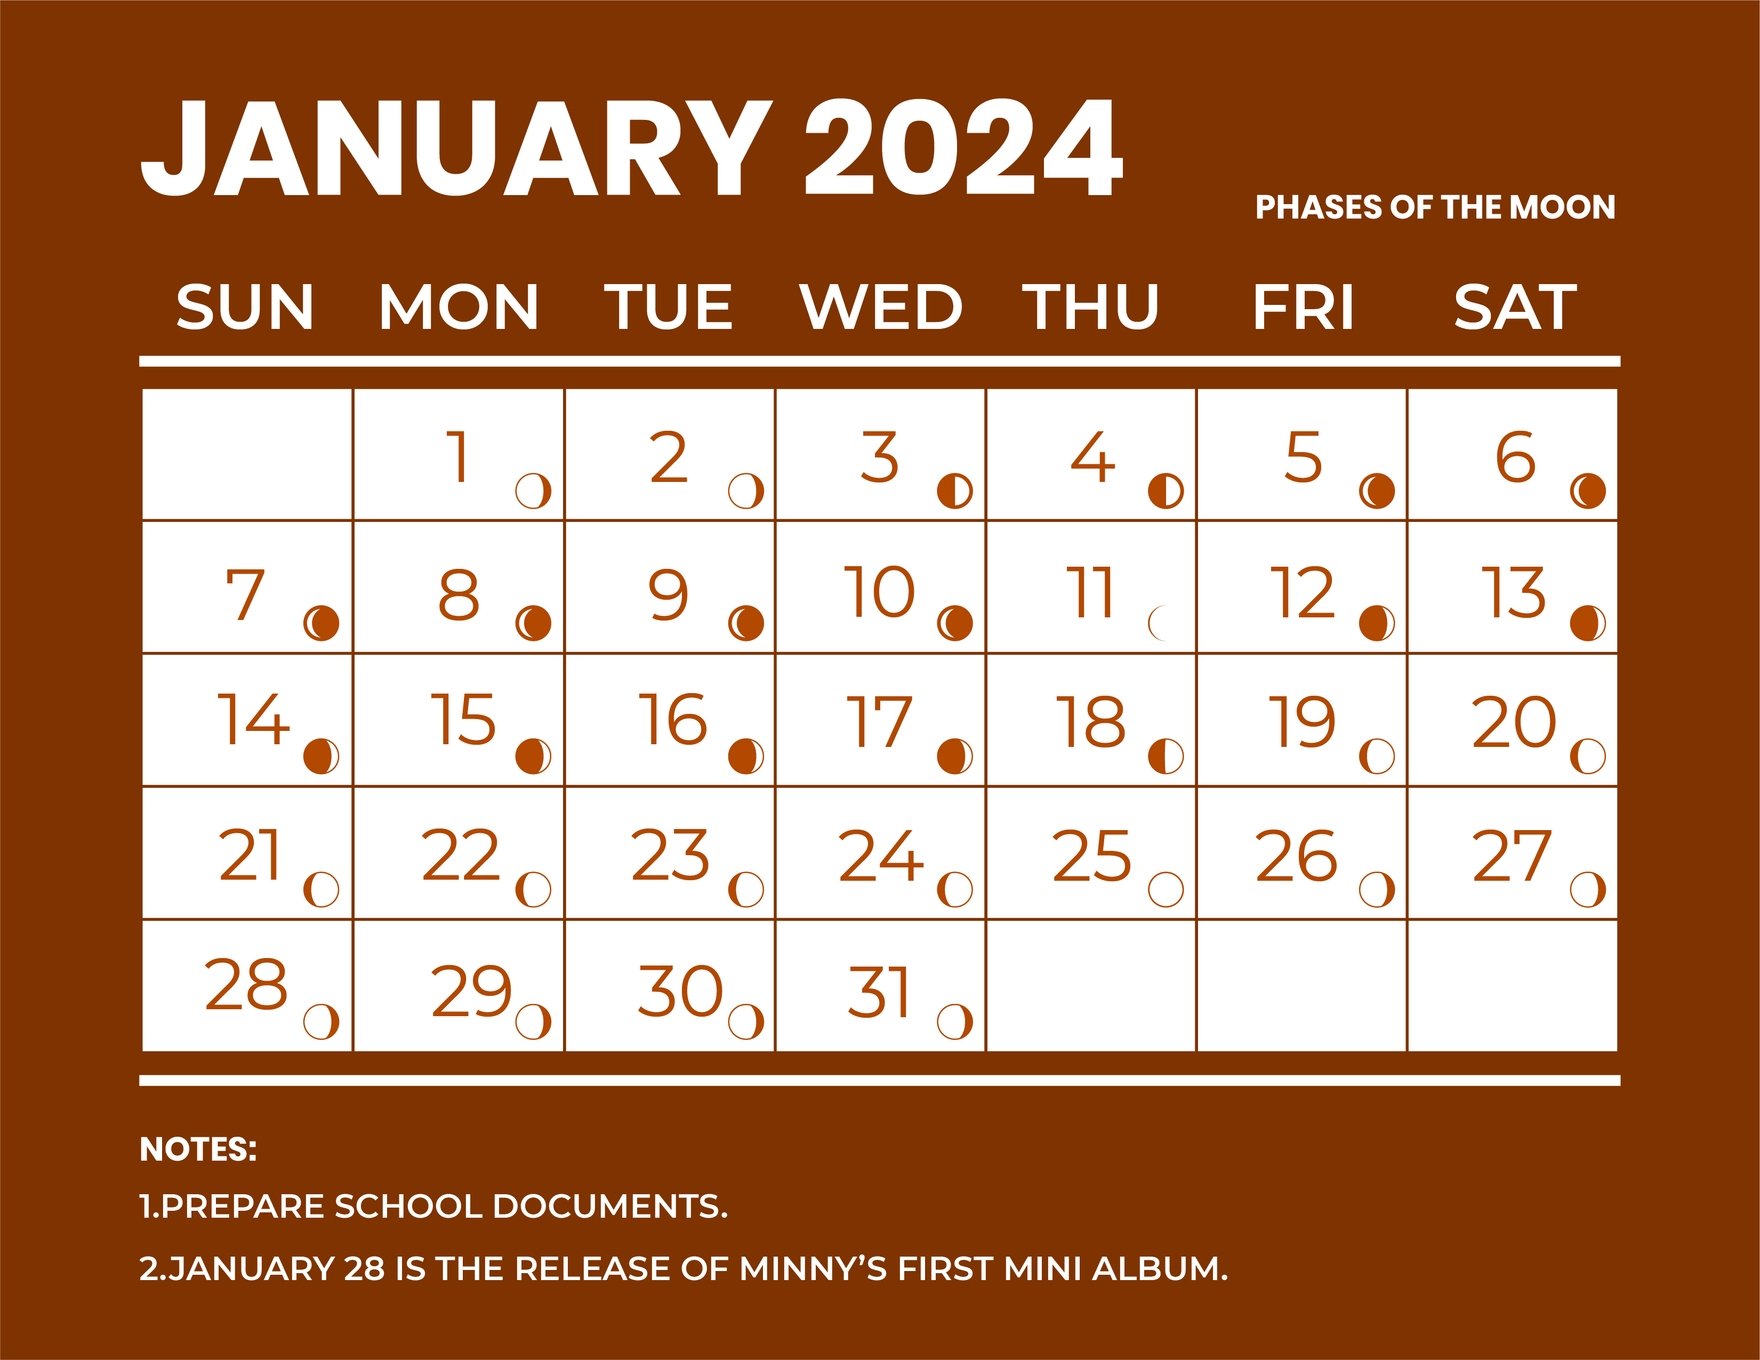 January 2024 Calendar With Moon Phases